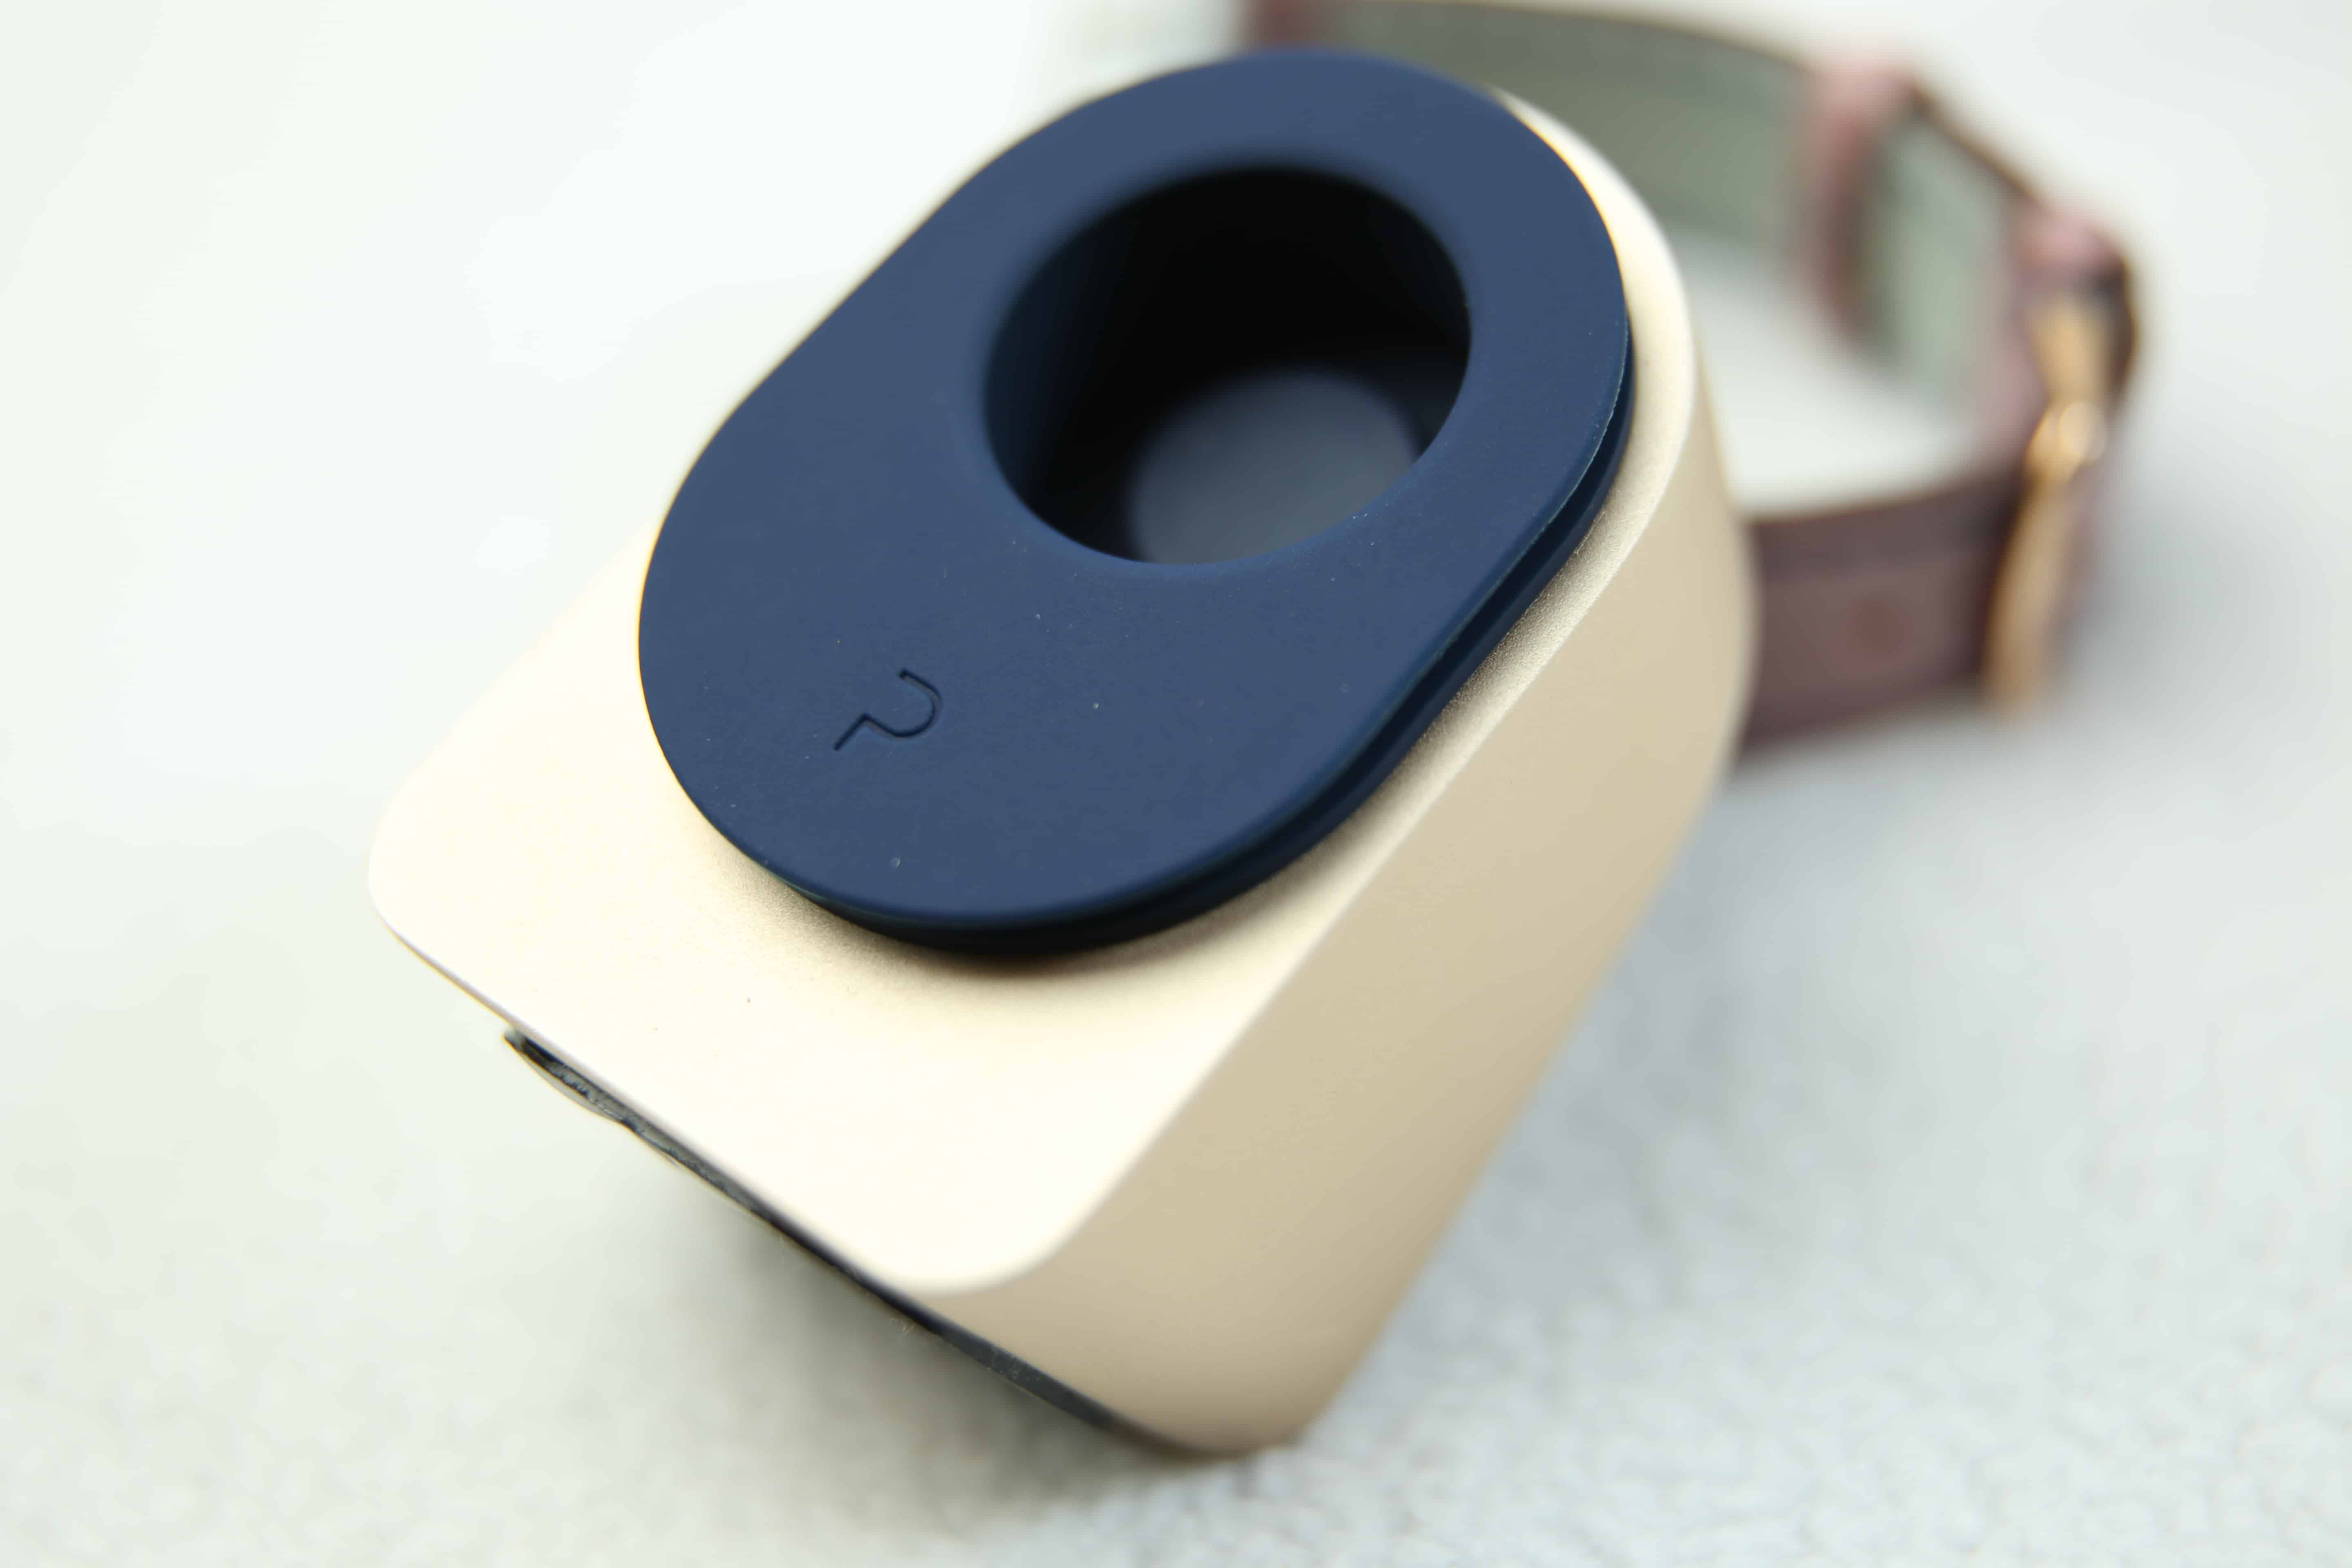 The Proper Apple Watch Dock in gold and navy